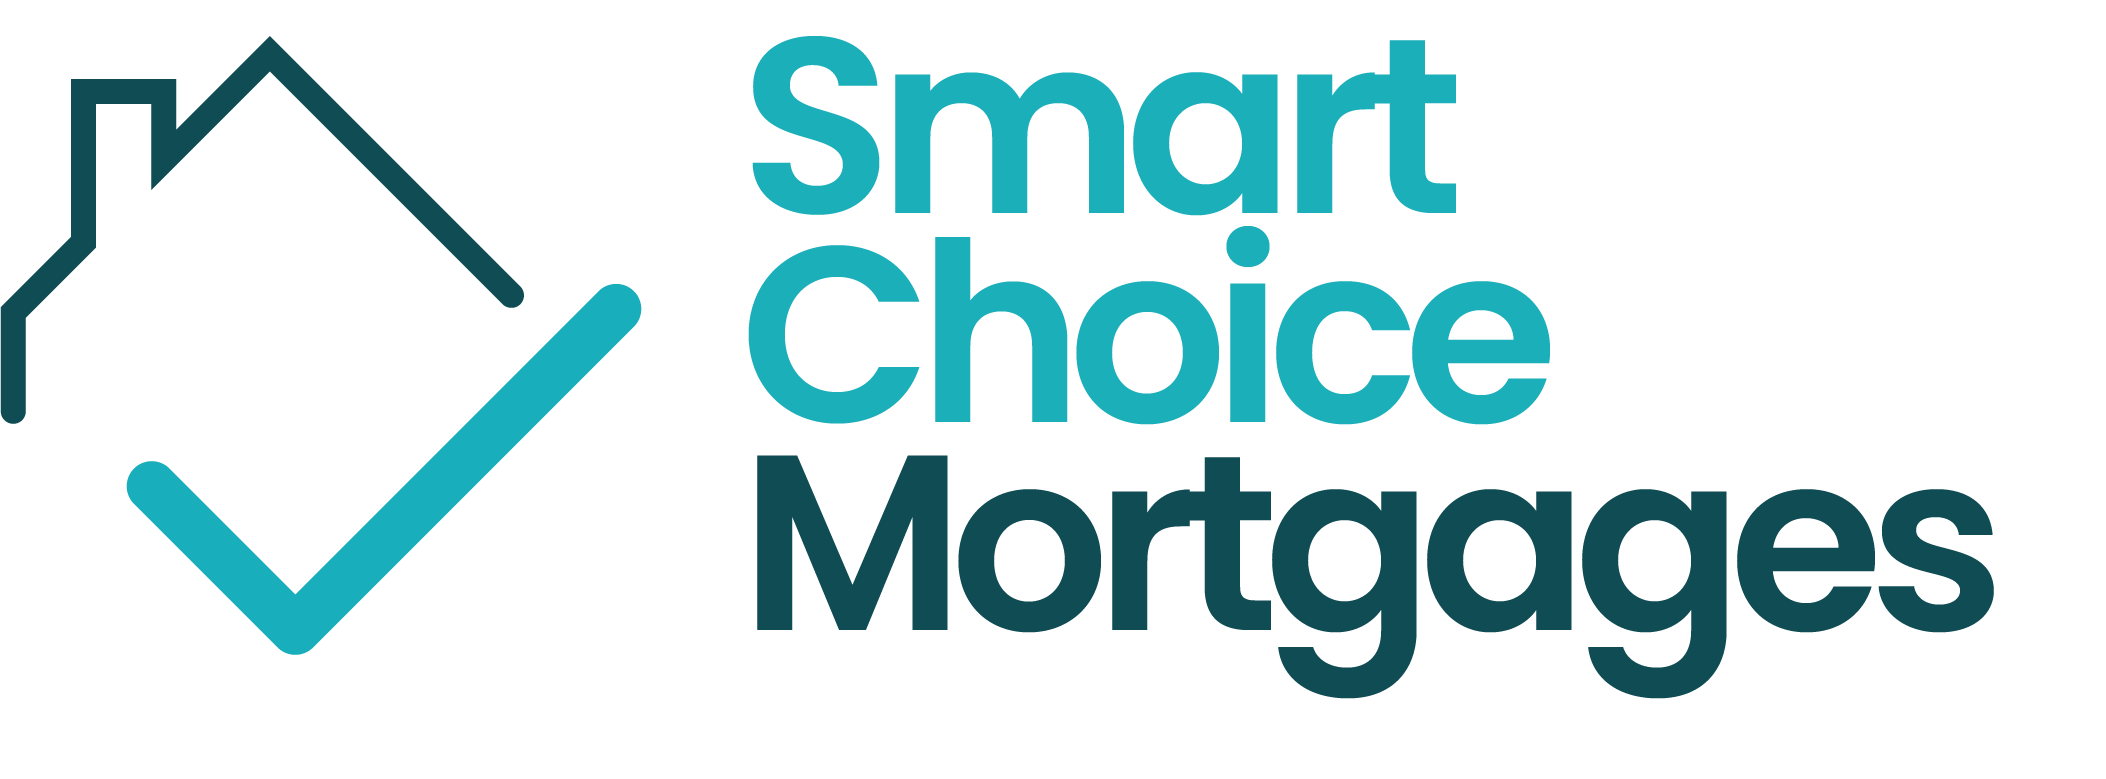 Smart Choice Mortgages